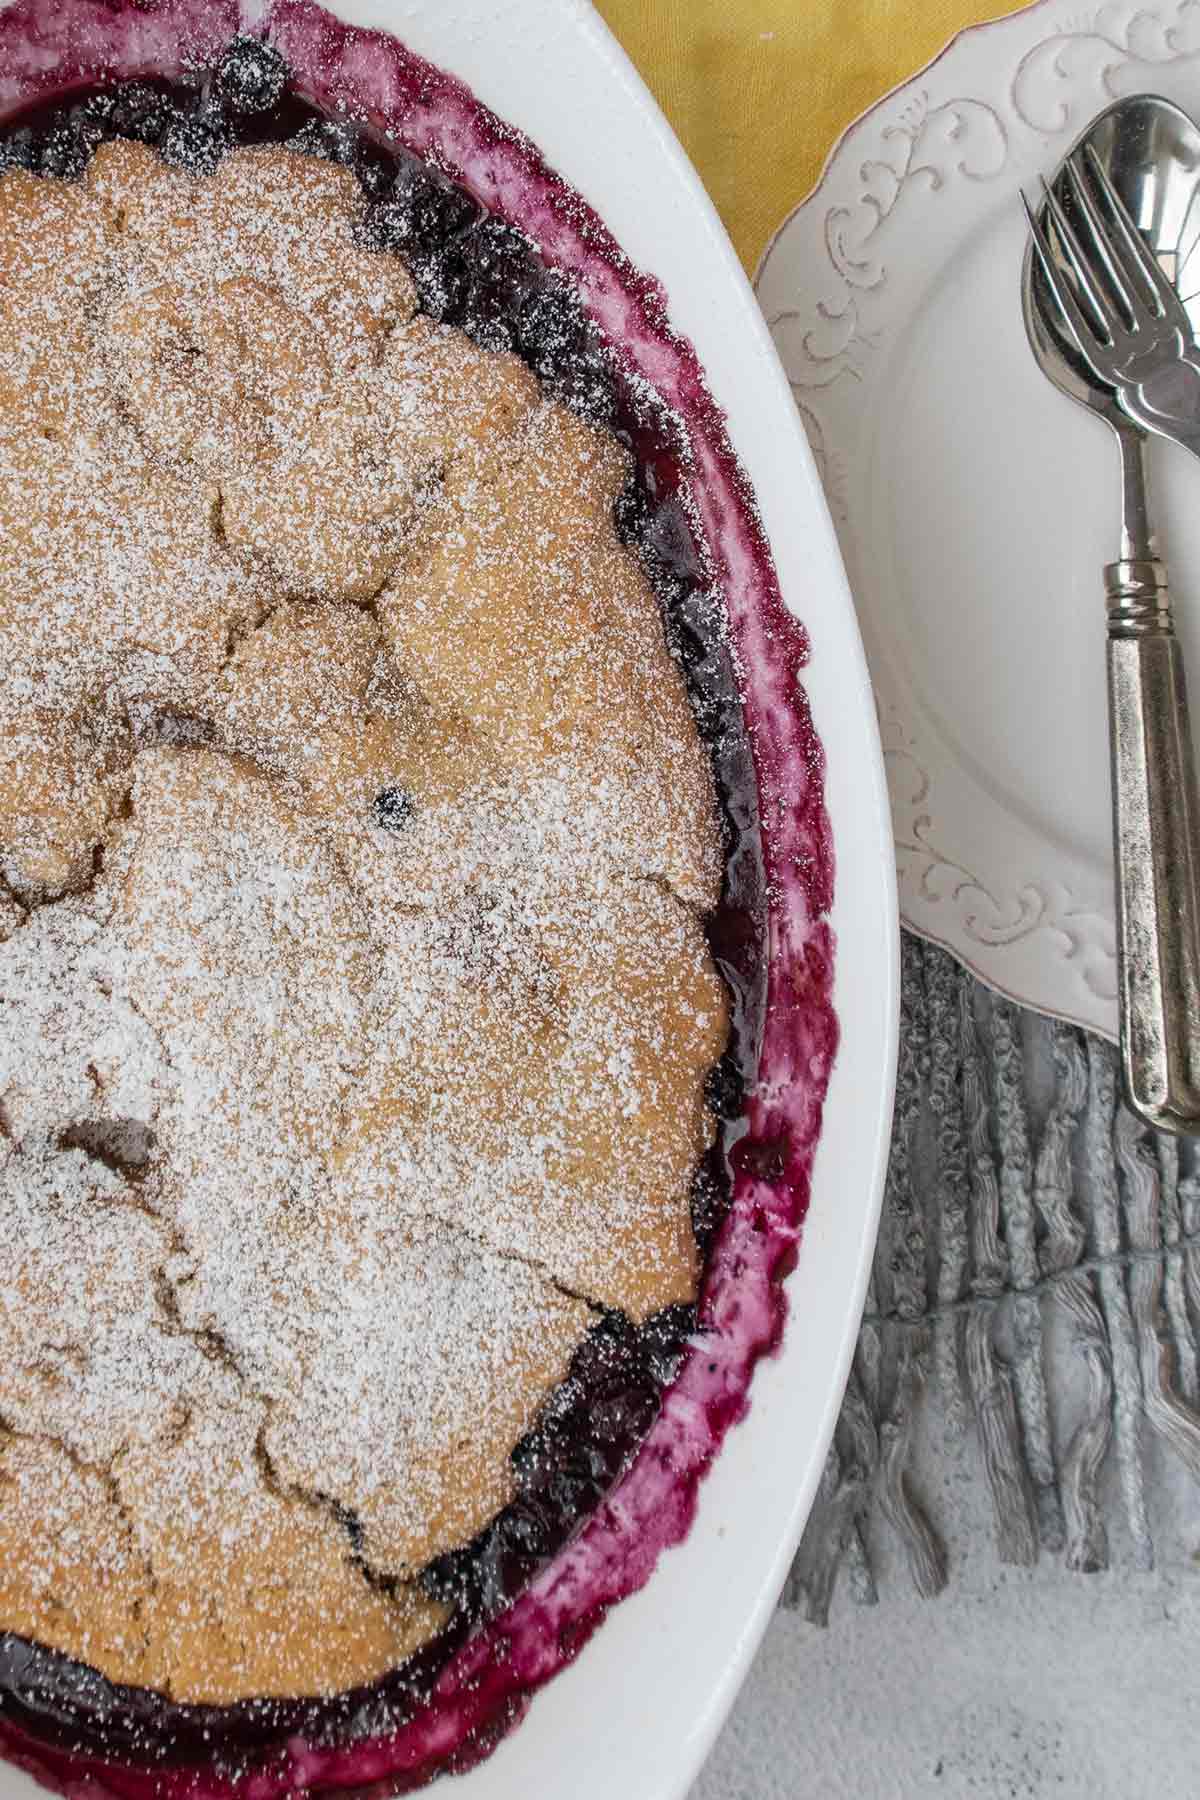 overview of baked blueberry pudding cake in a baking dish